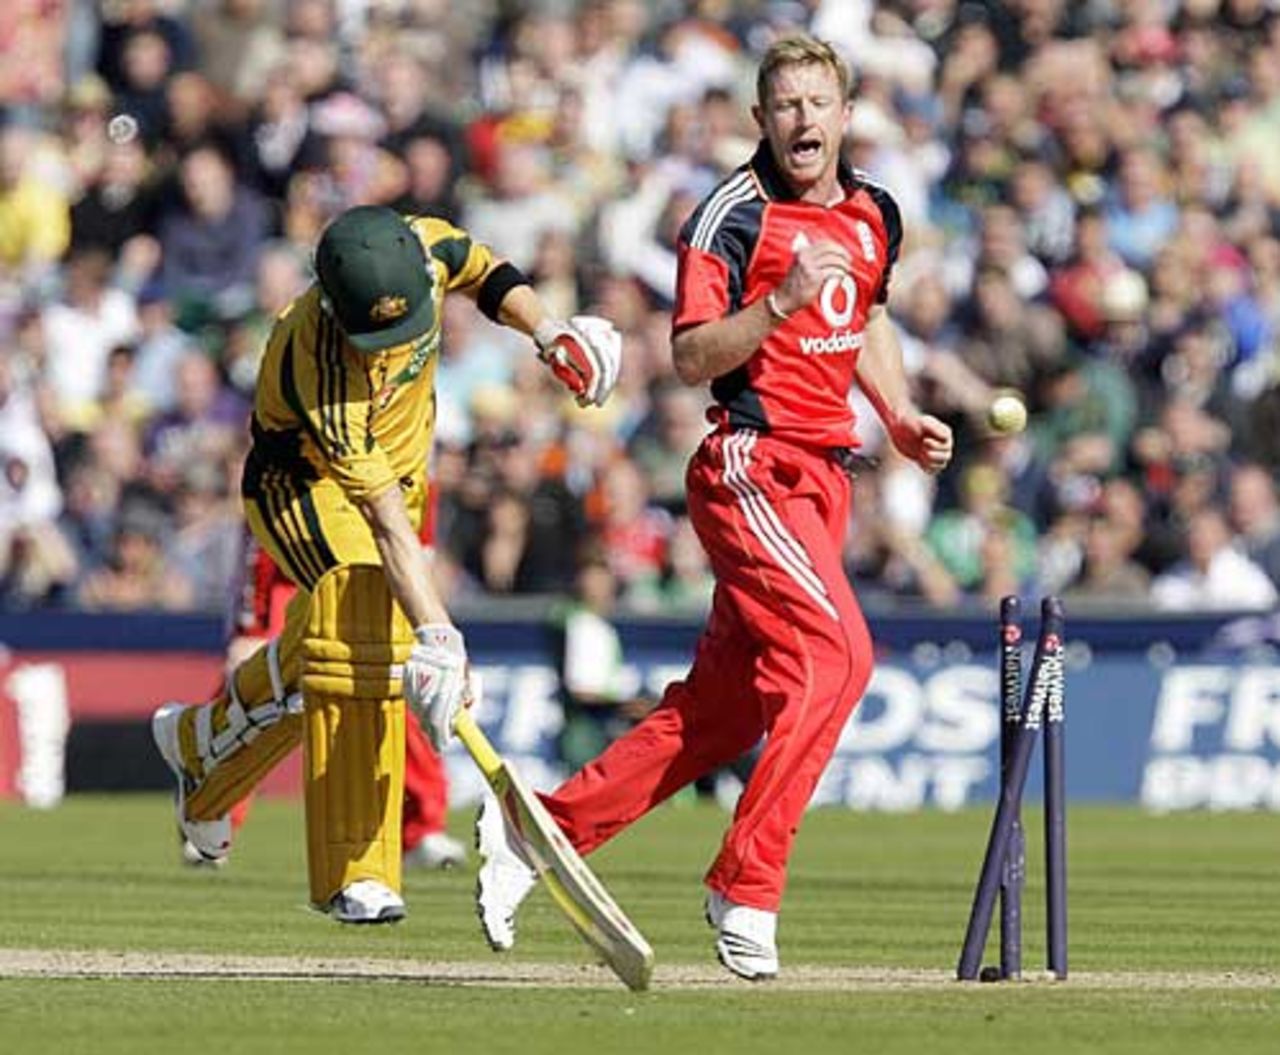 Paul Collingwood completes the run out of Michael Clarke, England v Australia, 7th ODI, Chester-le-Street, September 20, 2009